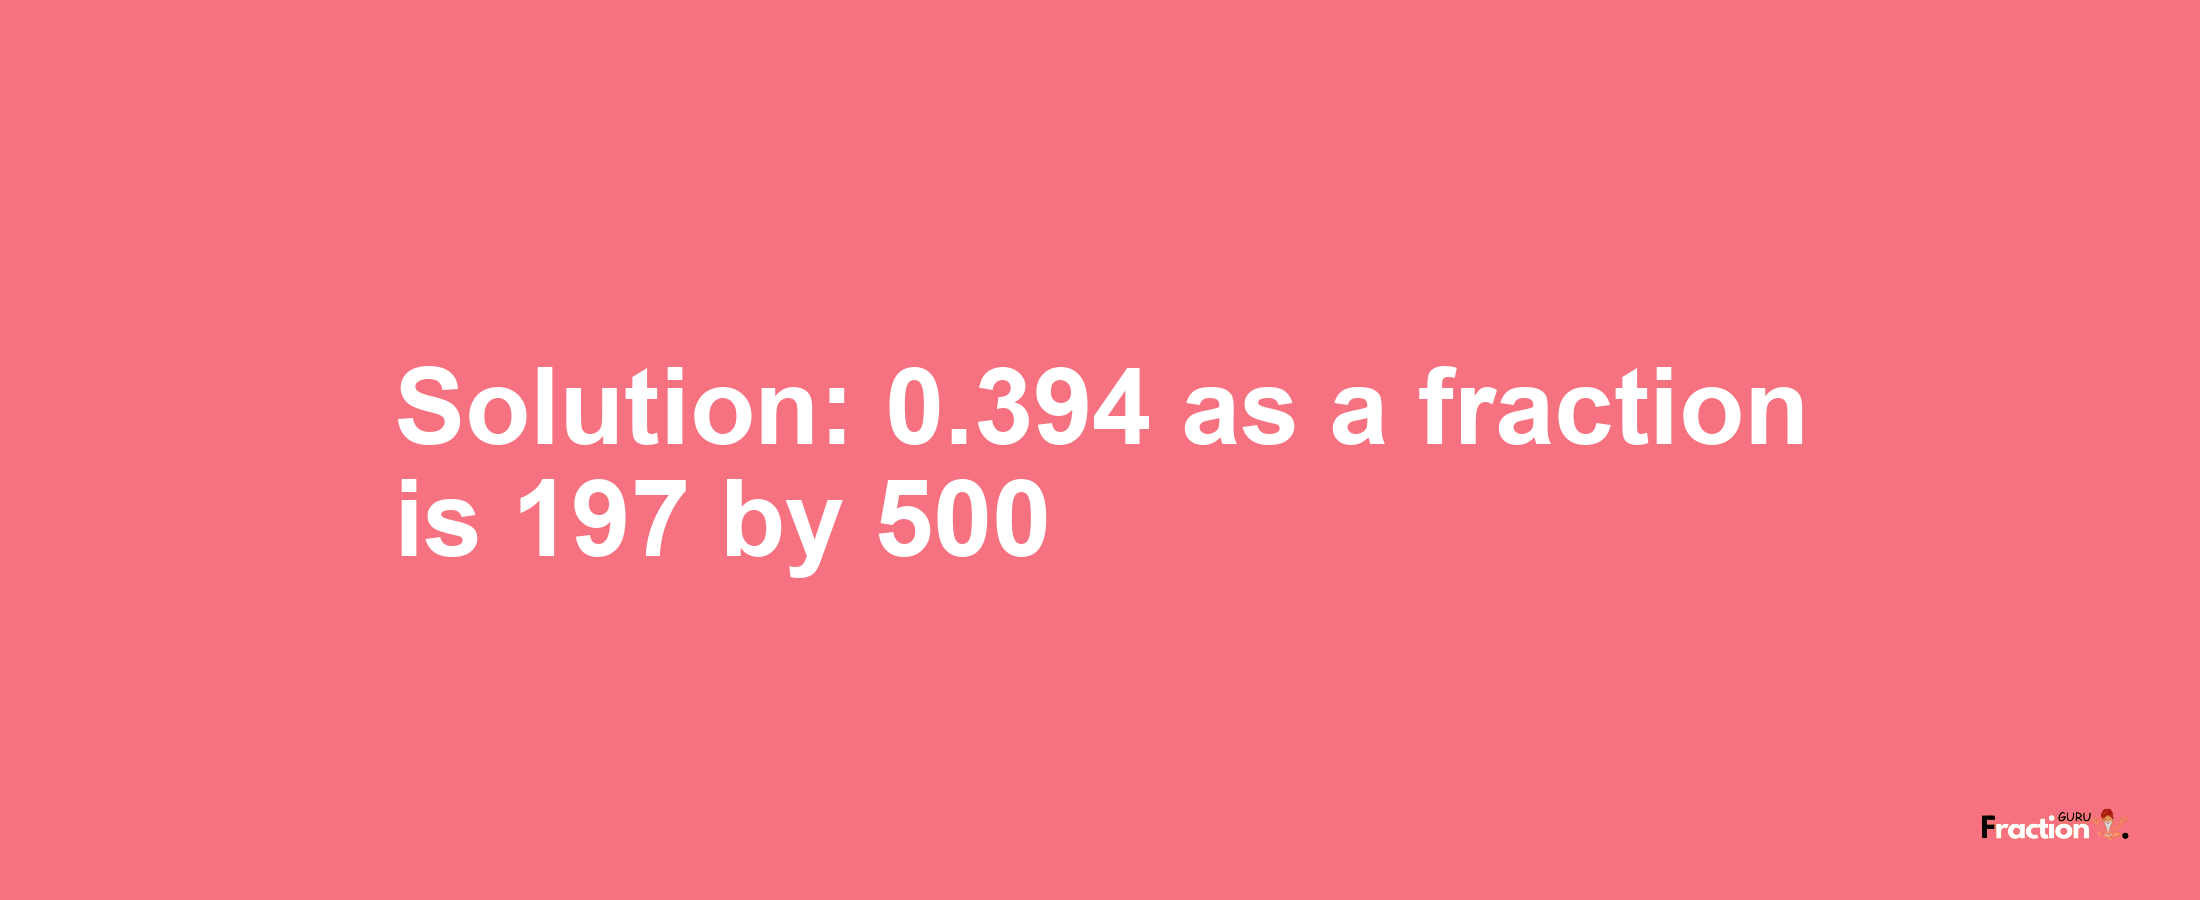 Solution:0.394 as a fraction is 197/500